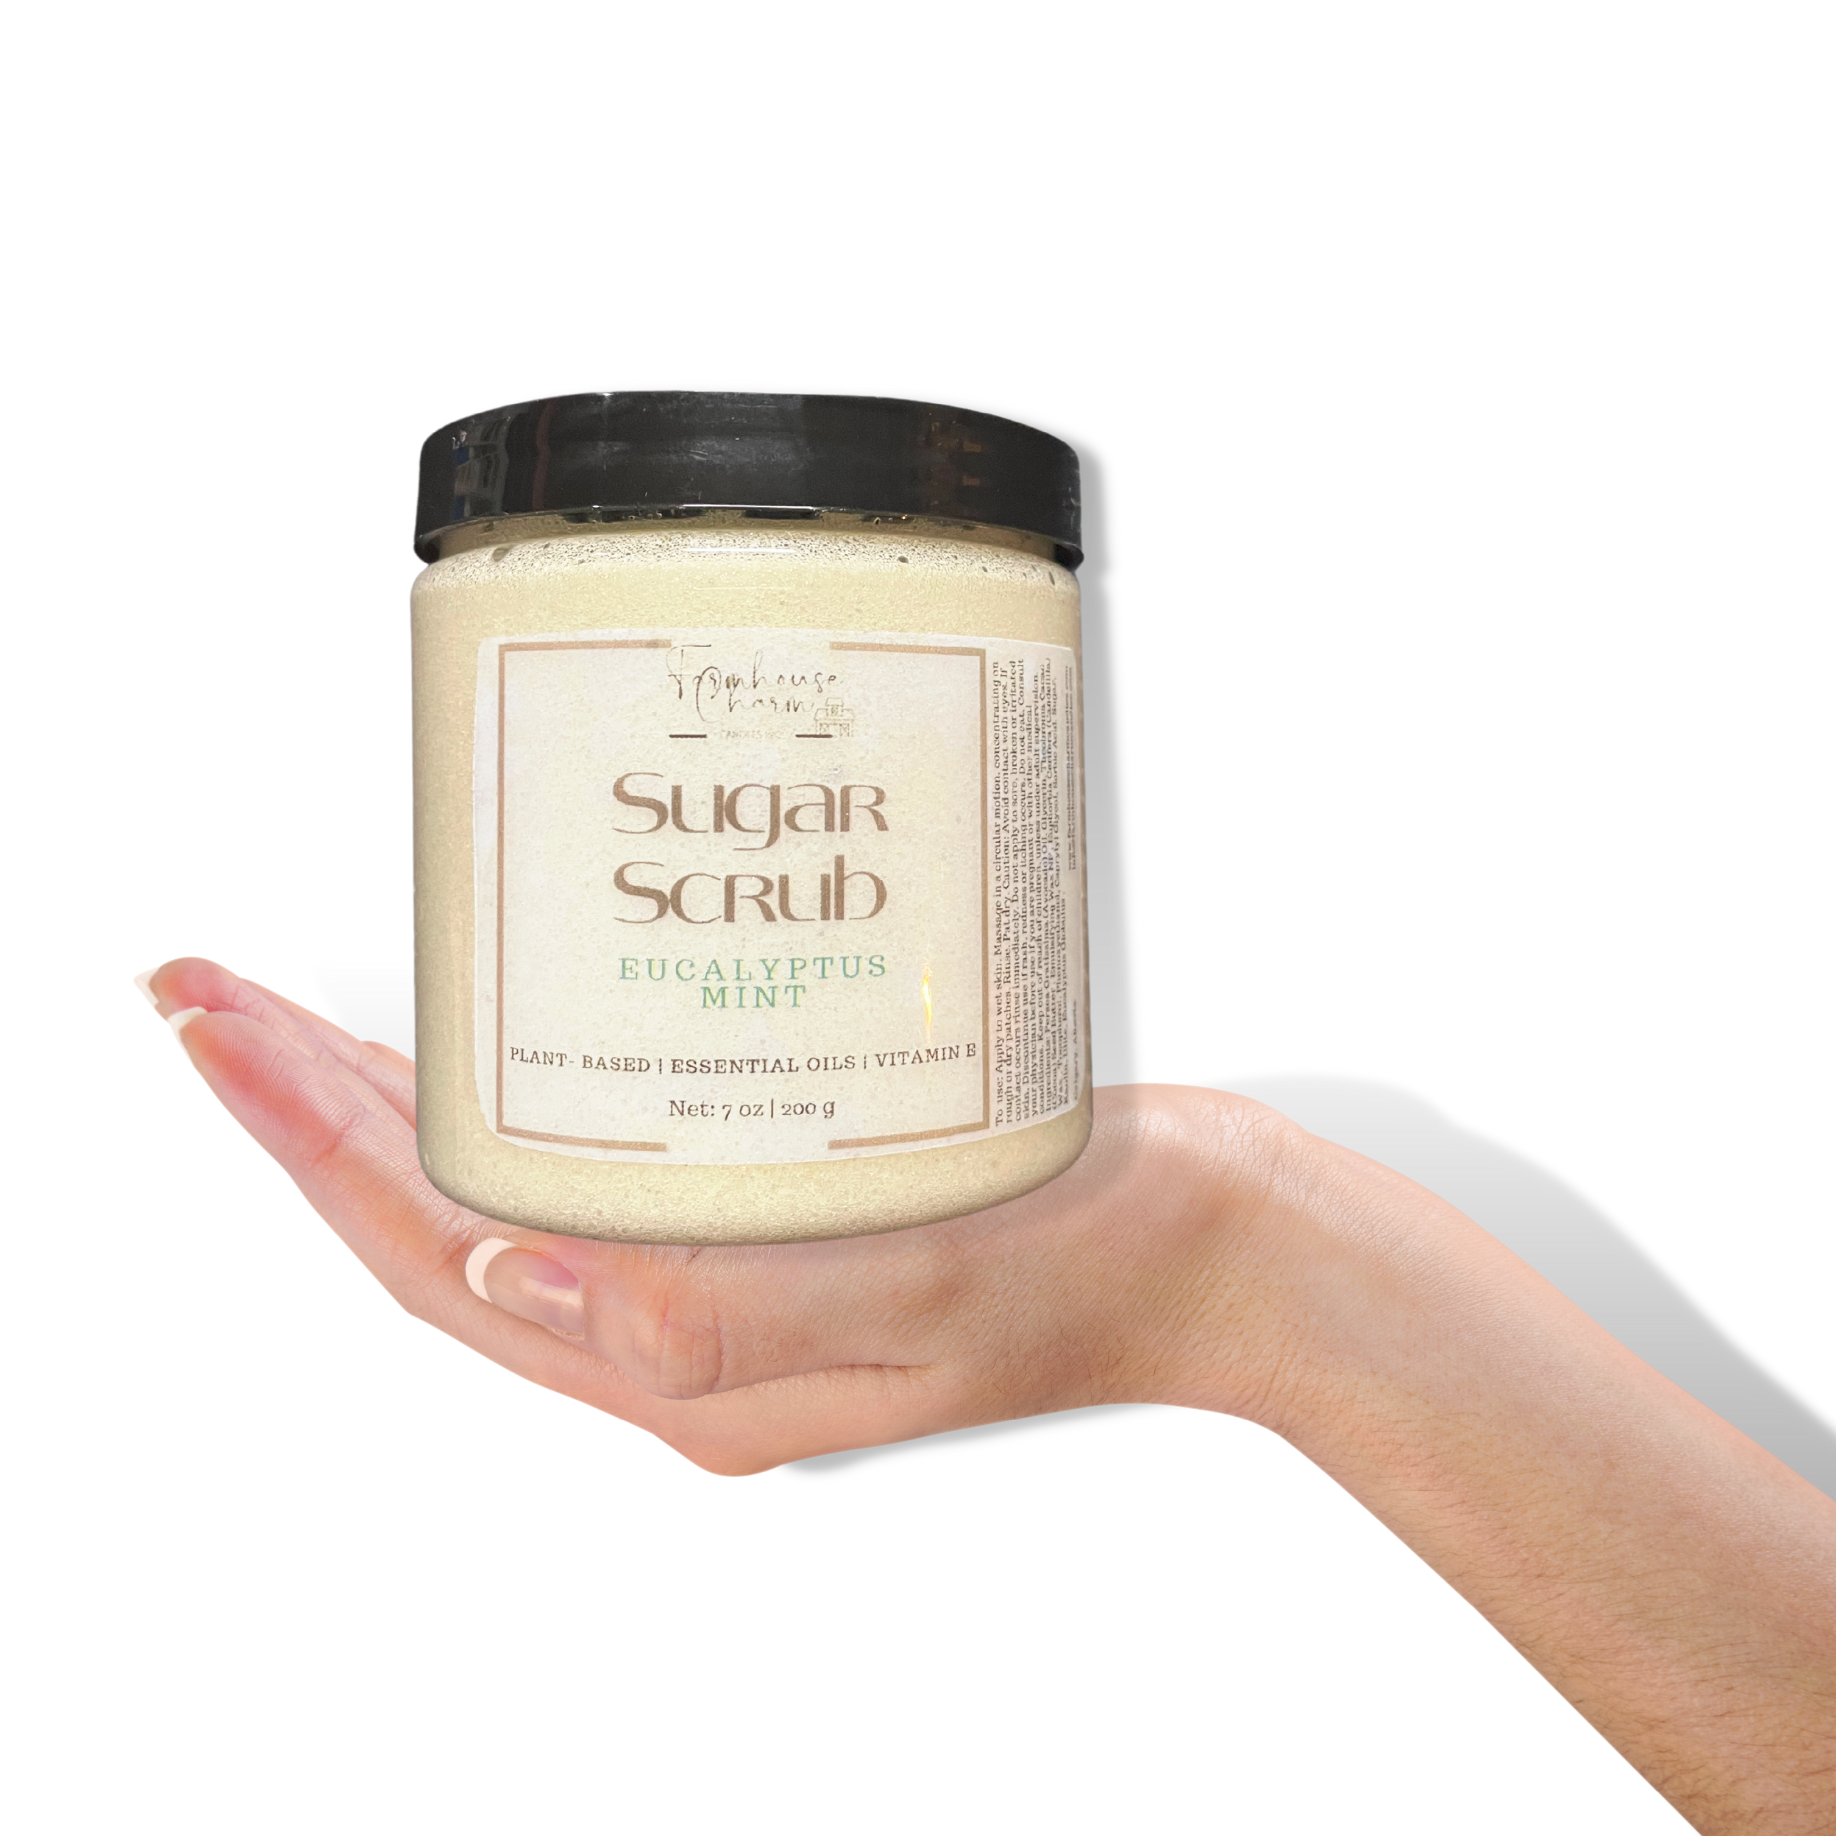 Farmhouse Charm Sugar Scrub- Eucalyptus Mint is a skincare product made with natural & plant-based ingredients, such as Sugar | Avocado Oil | Cocoa Butter | Essential Oils | Vitamin E Oil that are used to exfoliate and moisturize the skin. It helps to remove dead skin cells and promote healthy, glowing skin. It does not contain any artificial colorants and fragrance.